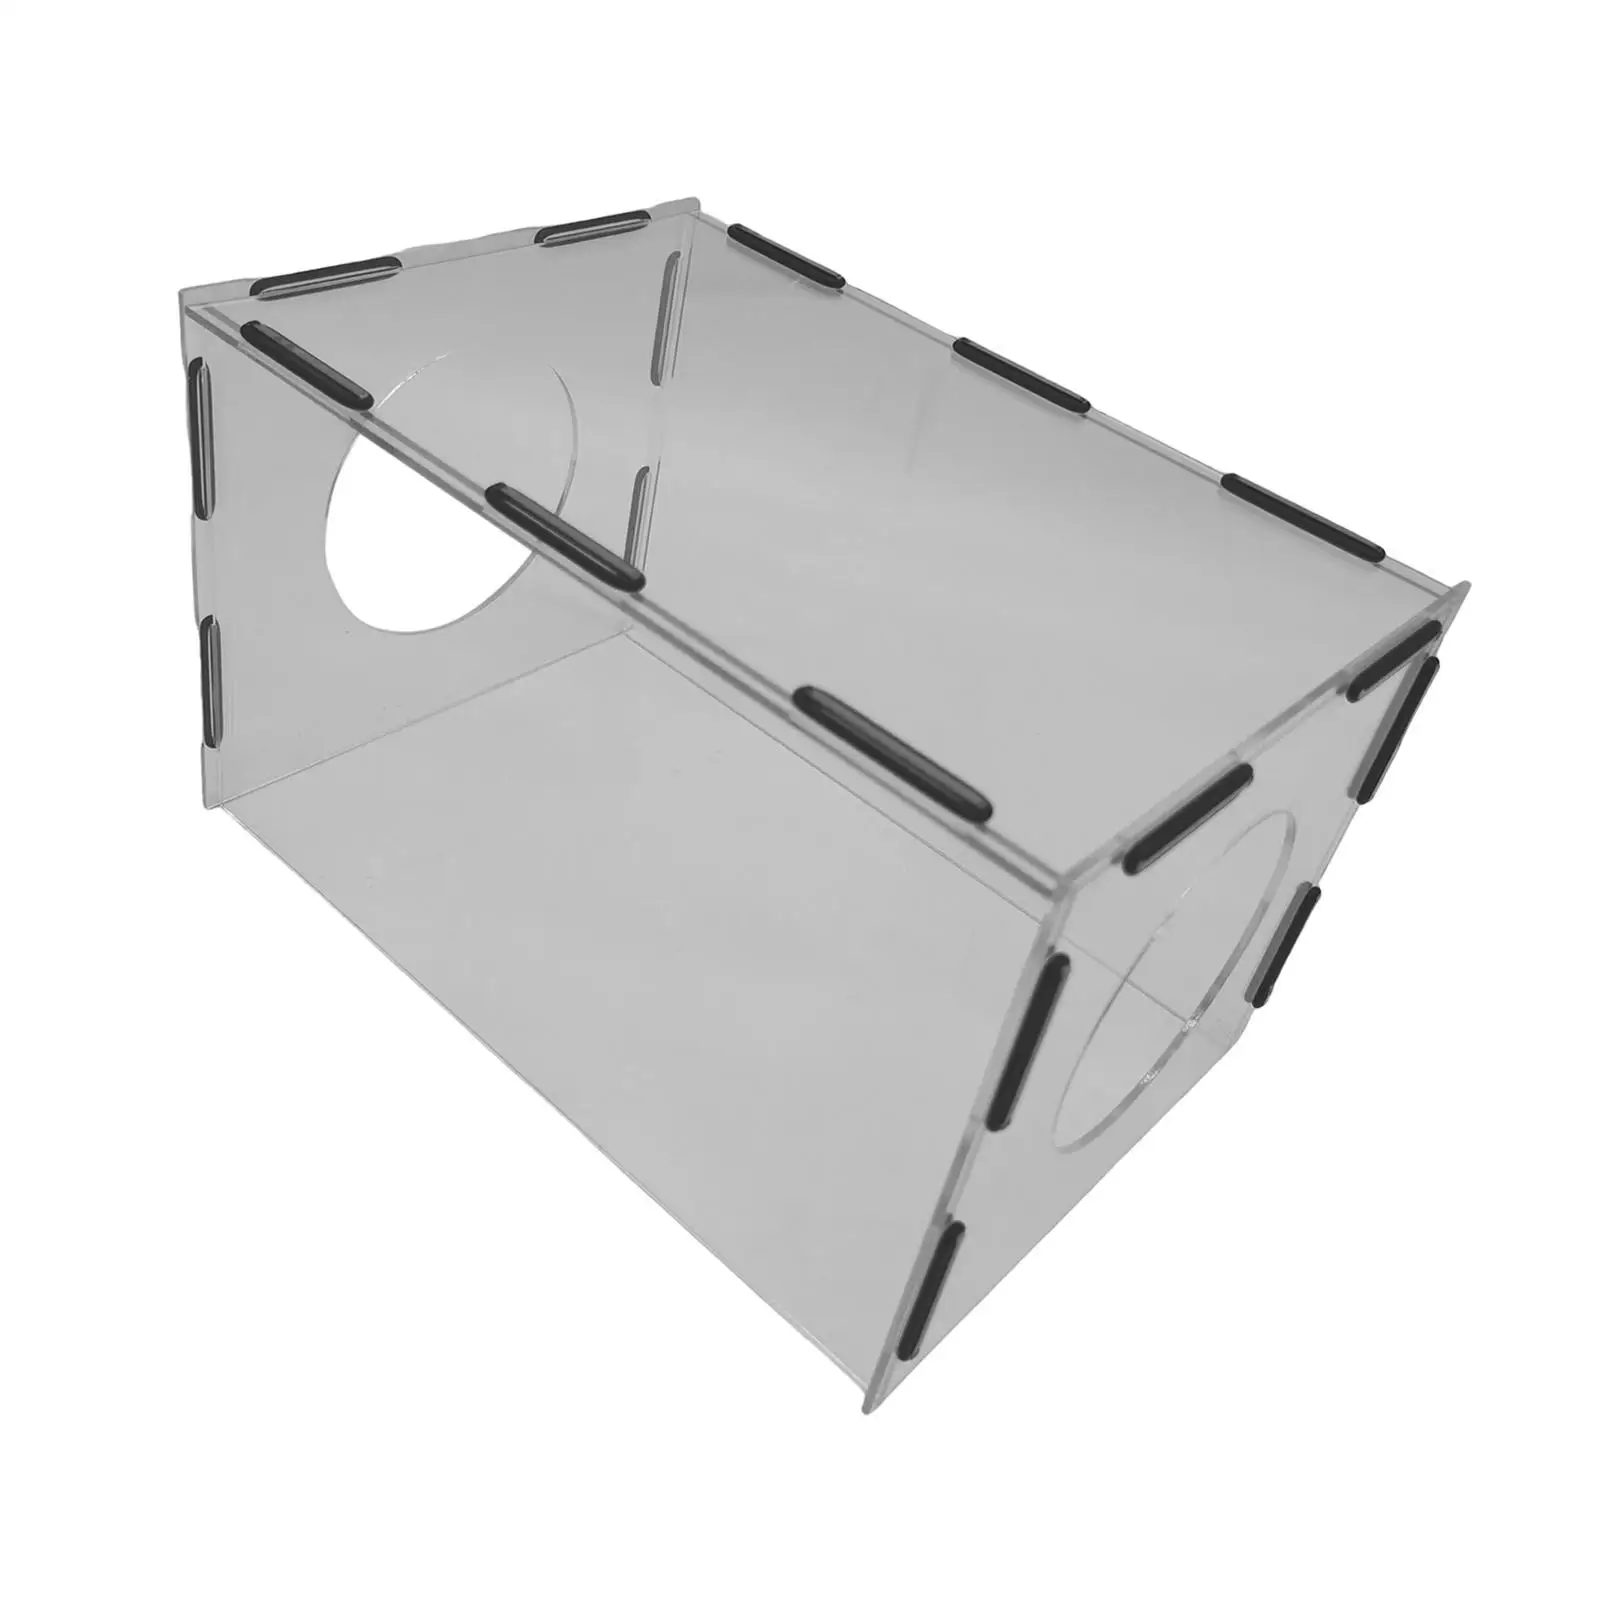 Grinding Dust Box Dustproof Polishing Dust Hood Dry Grinding Dust Cover Dust Cage Clear Portable for Sculpturing Polishing